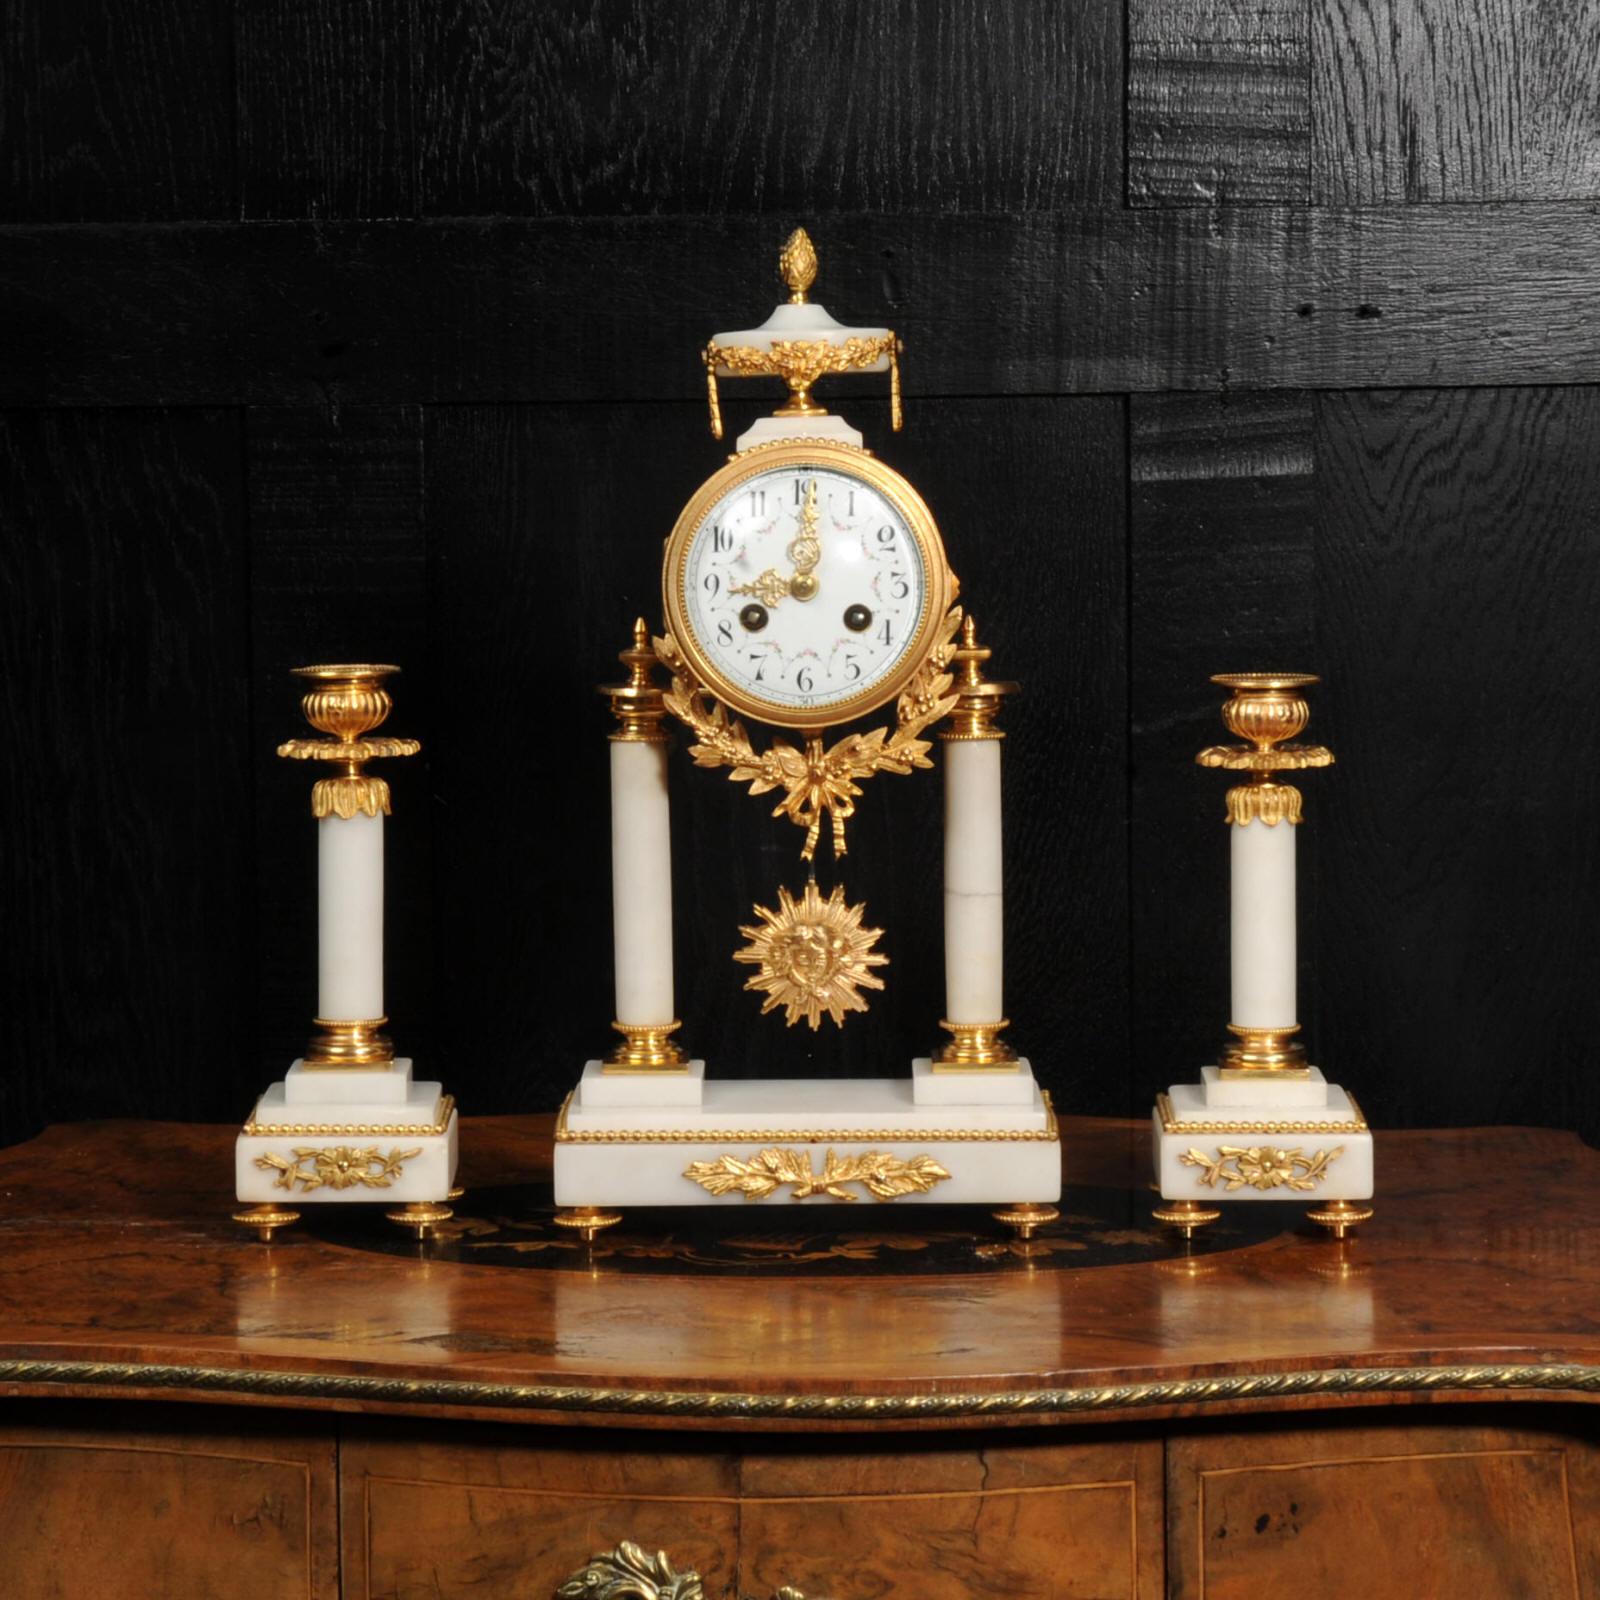 A beautiful original antique French portico clock by Vincenti. It is made of white marble mounted with ormolu (finely gilded bronze). The movement is held aloft on two marble pillars with the ormolu sunburst pendulum swinging gently below. A